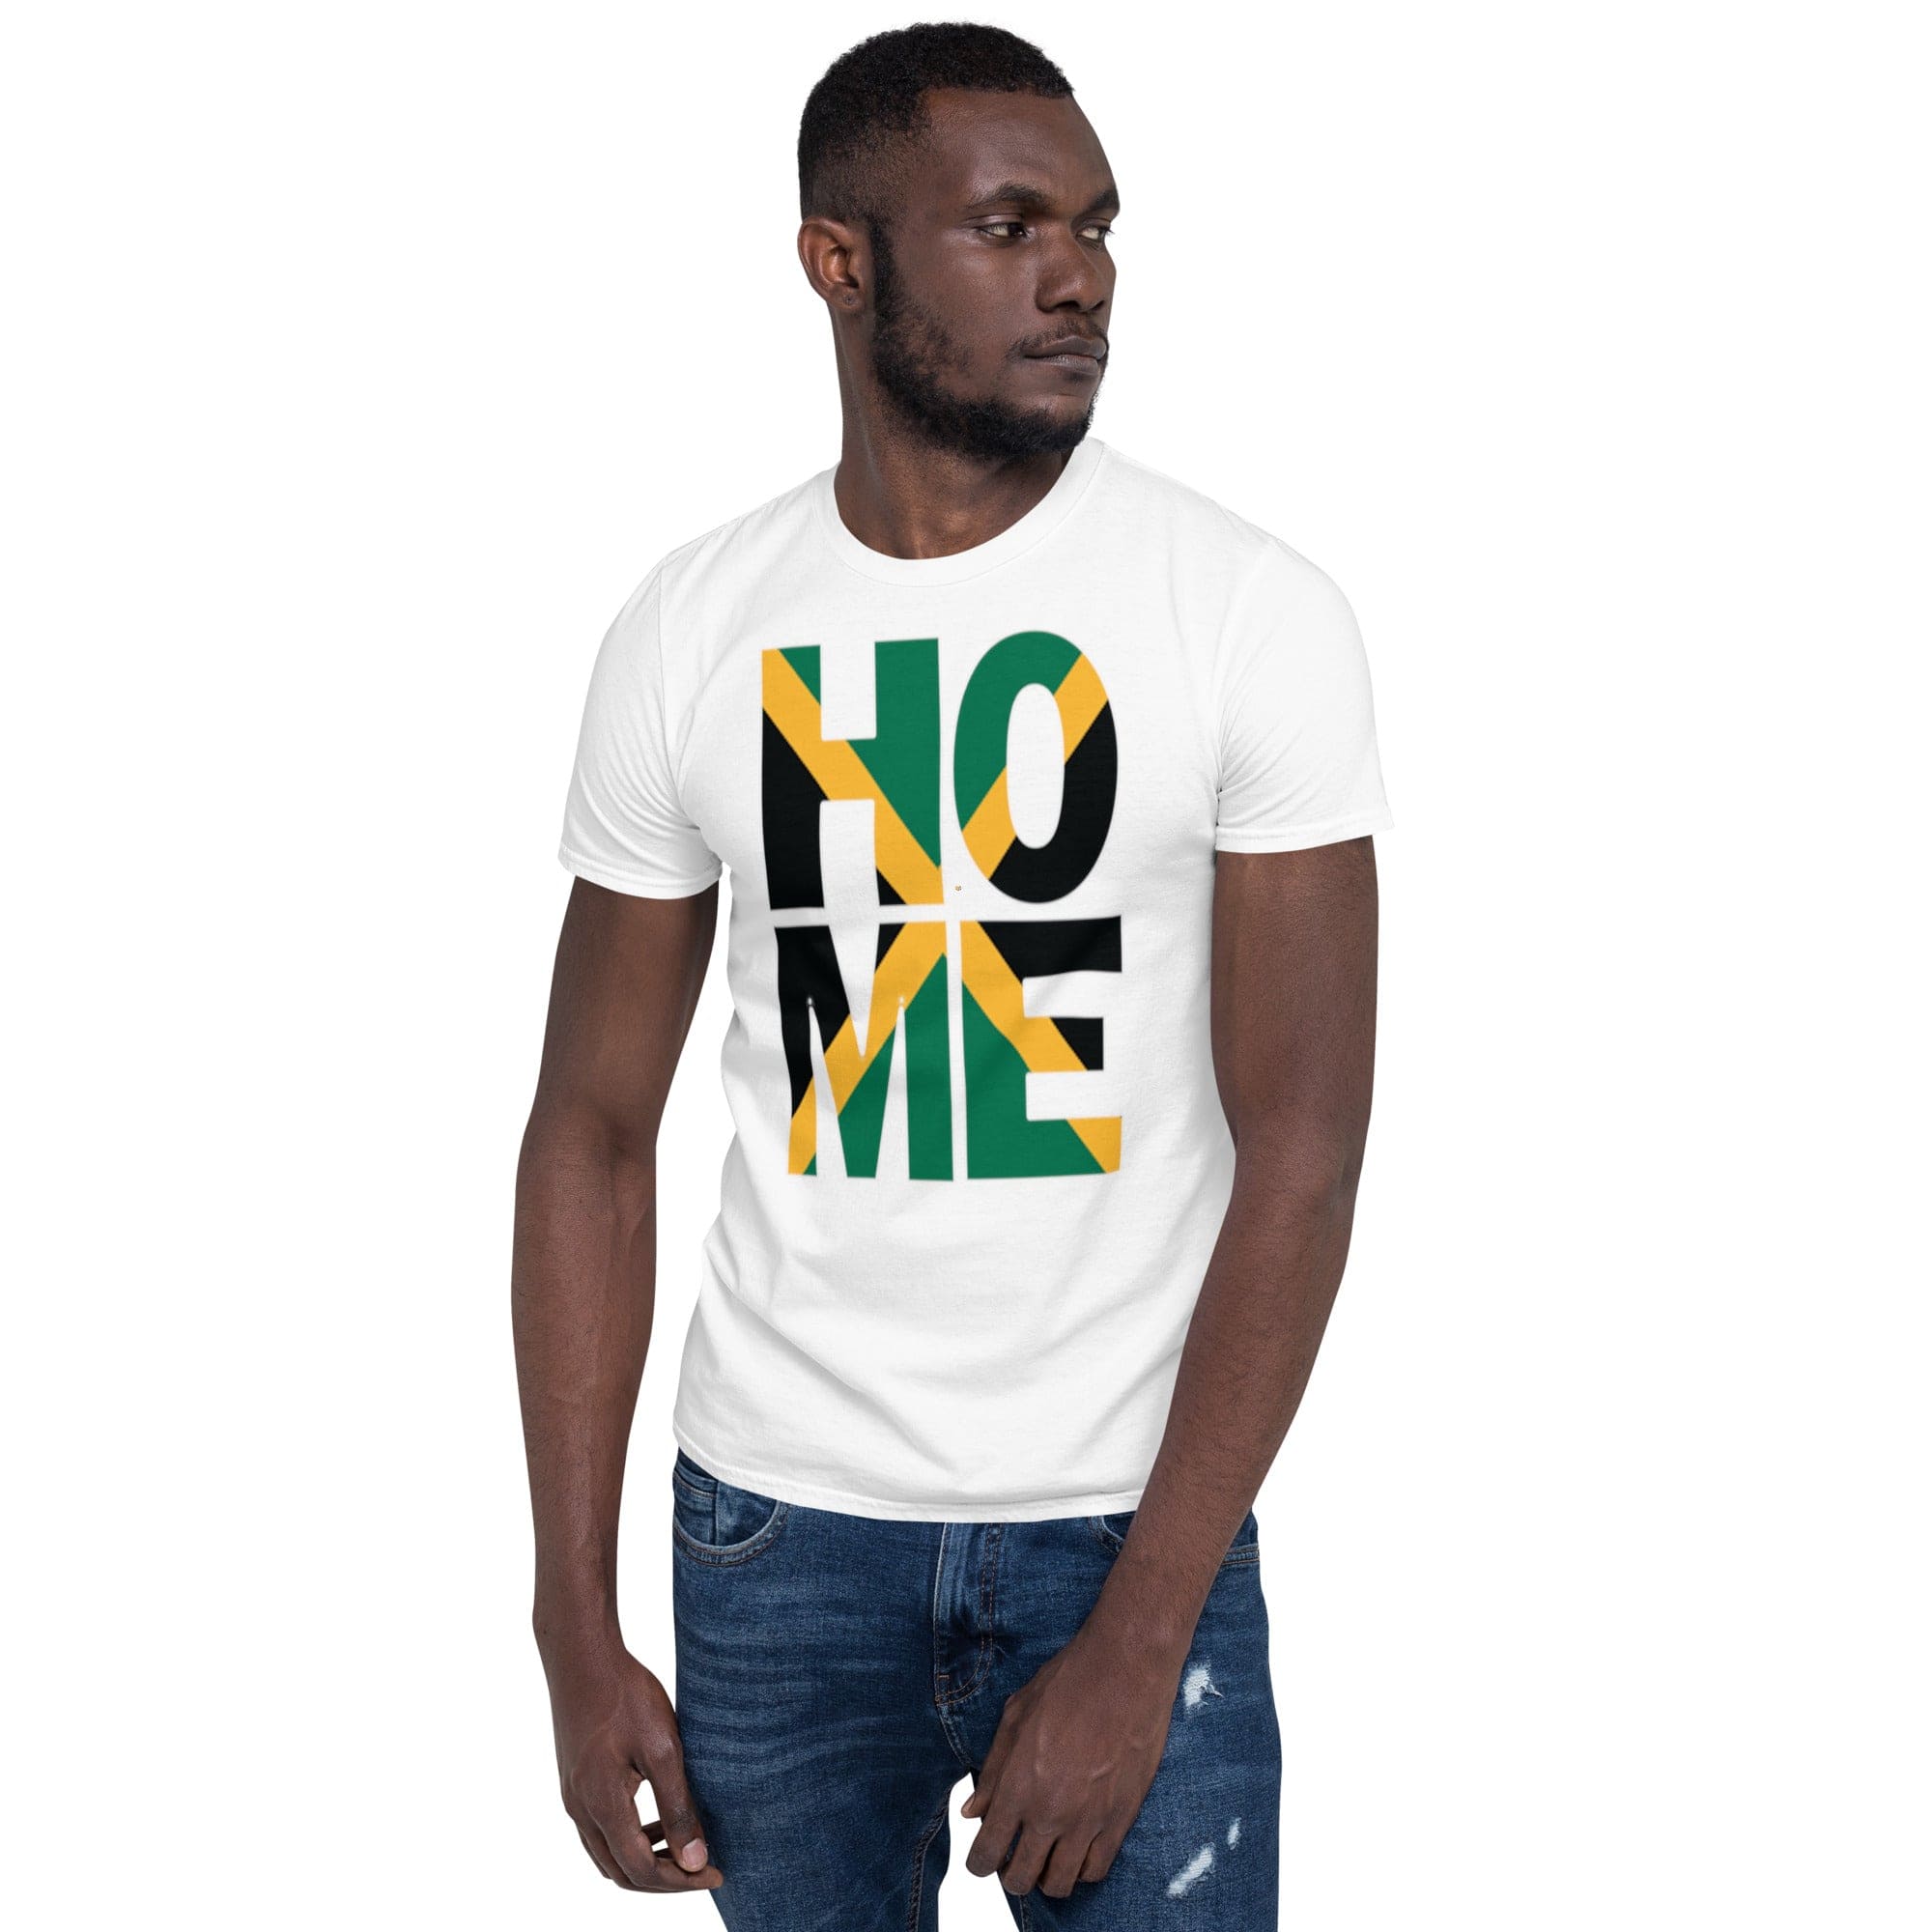 Jamaica flag design in the words HOME on a white color shirt on the front of a black man.